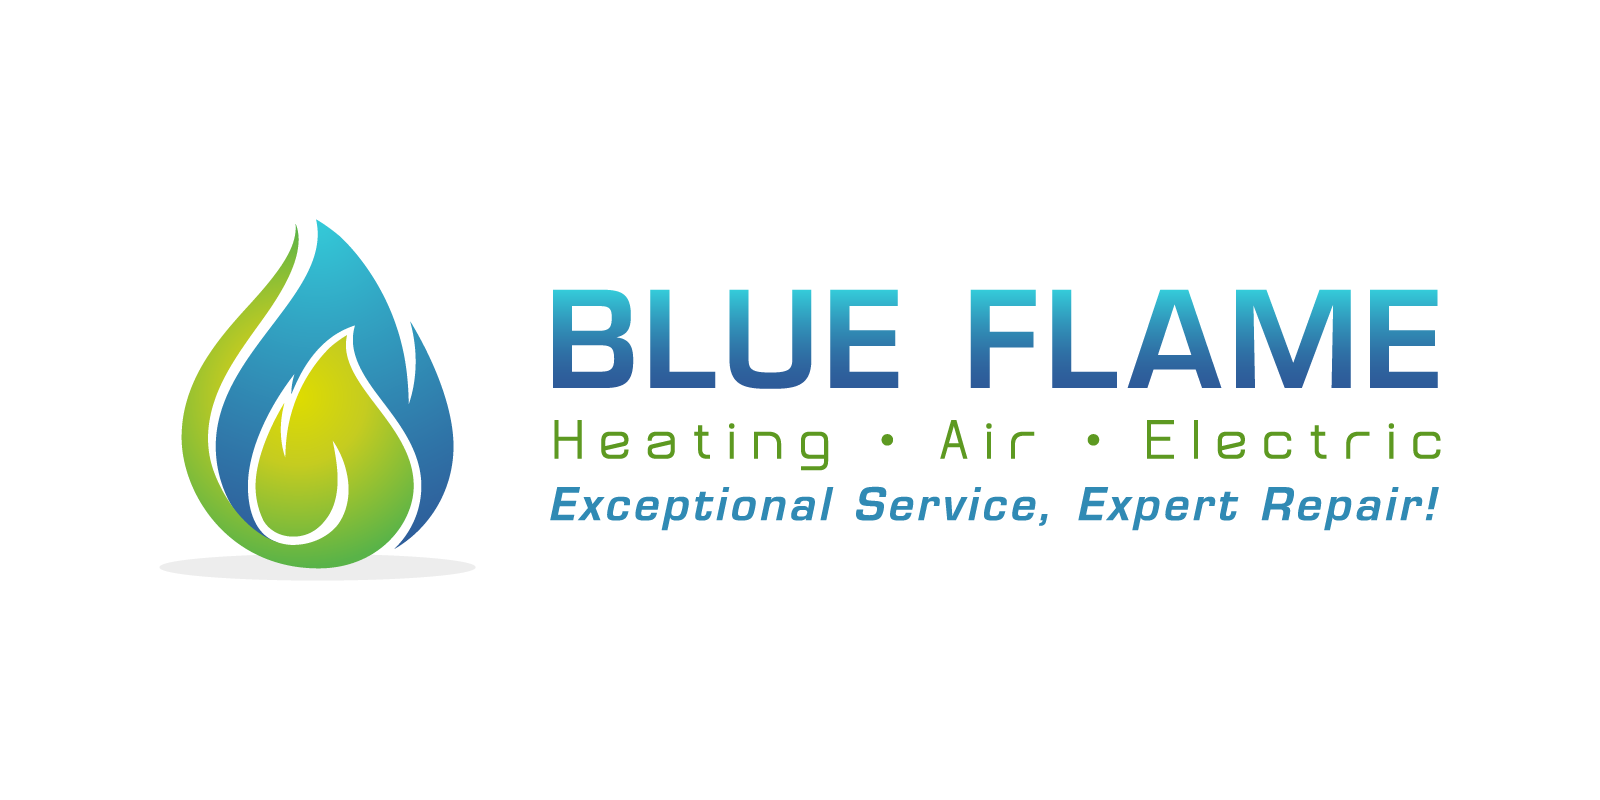 Blue Flame Heating and Air Conditioning Logo